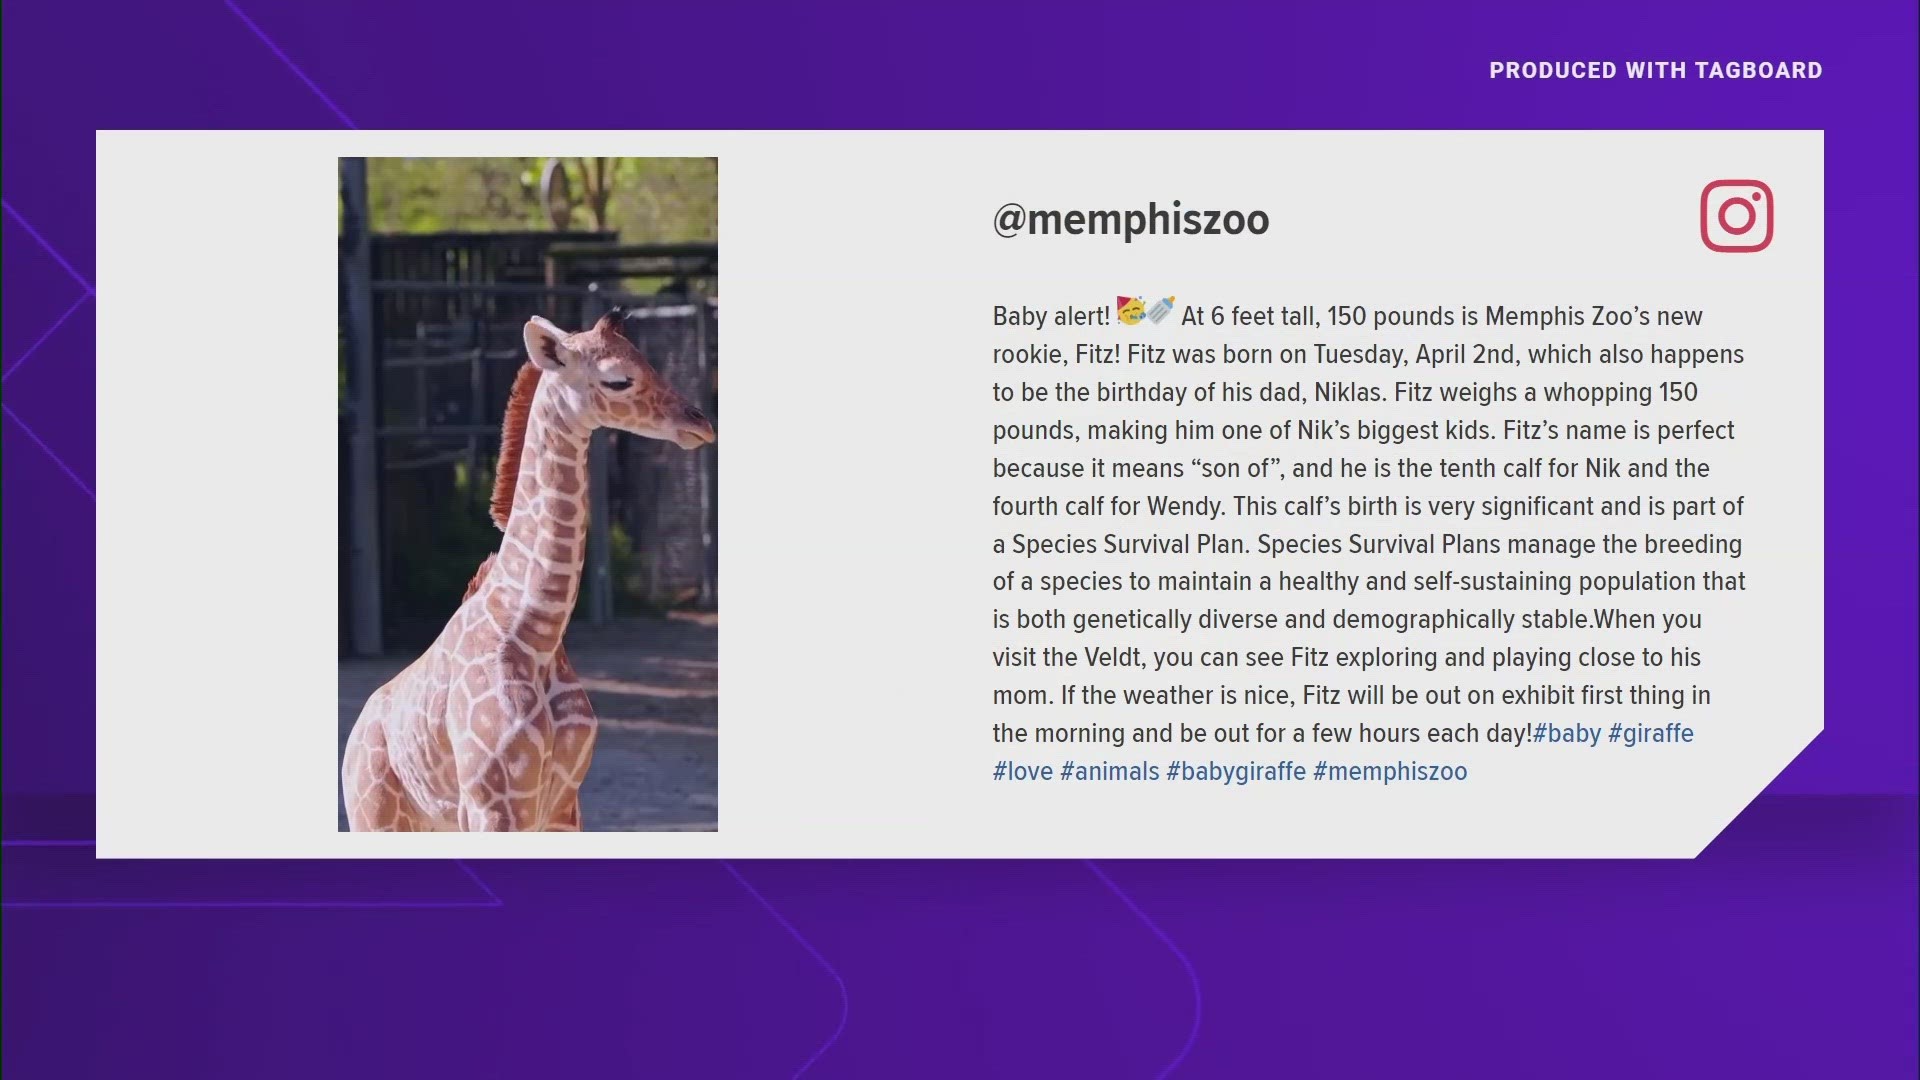 Coming in at 6 feet tall, 150 pounds is Memphis Zoo’s new rookie, Fitz. The giraffe was born on Tuesday, April 2nd, which also happens to be his dad Niklas’ birthday